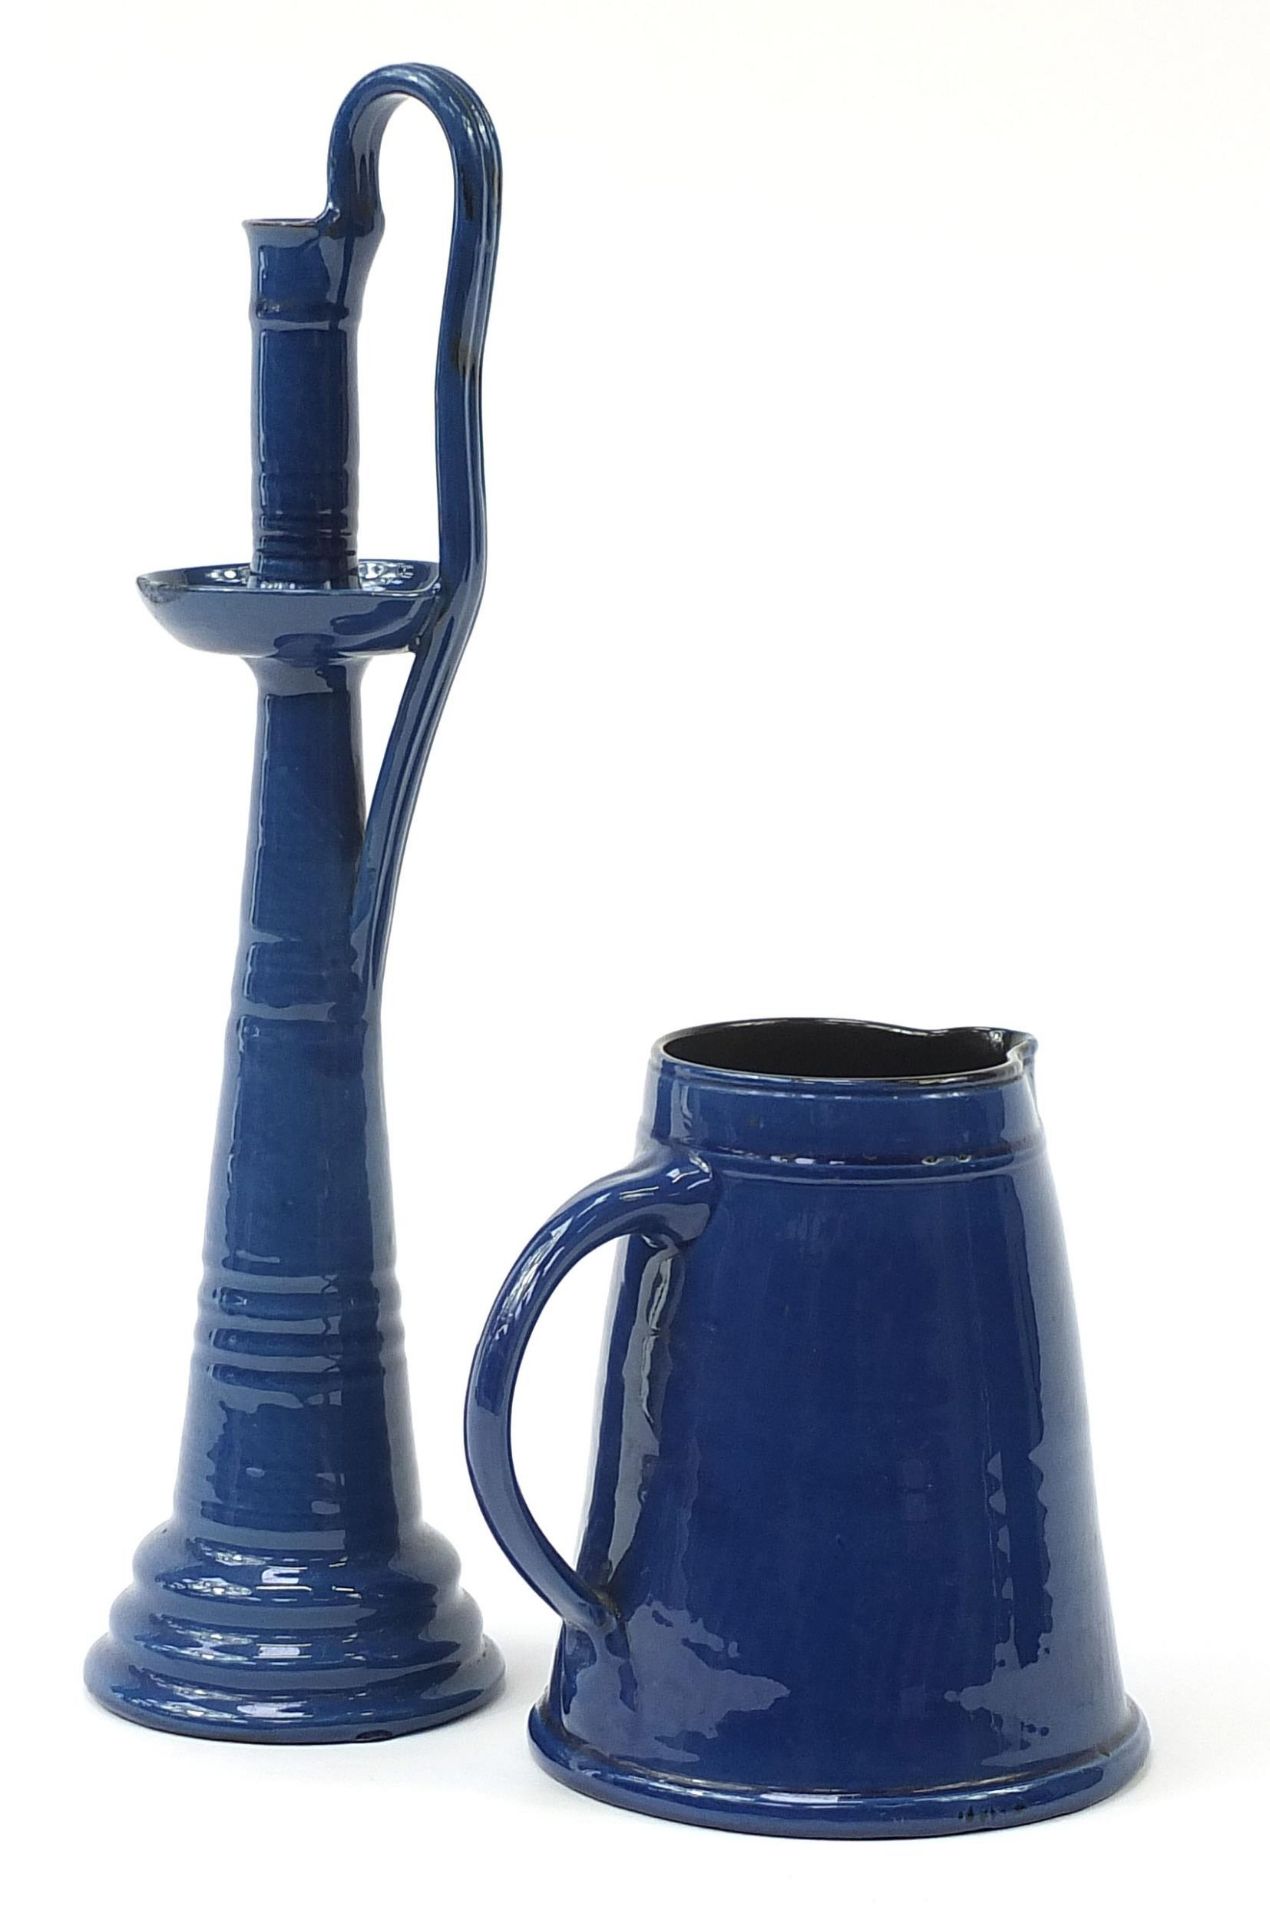 C H Brannam pottery blue glazed jug and a similar candlestick, the largest 44cm high - Image 2 of 4